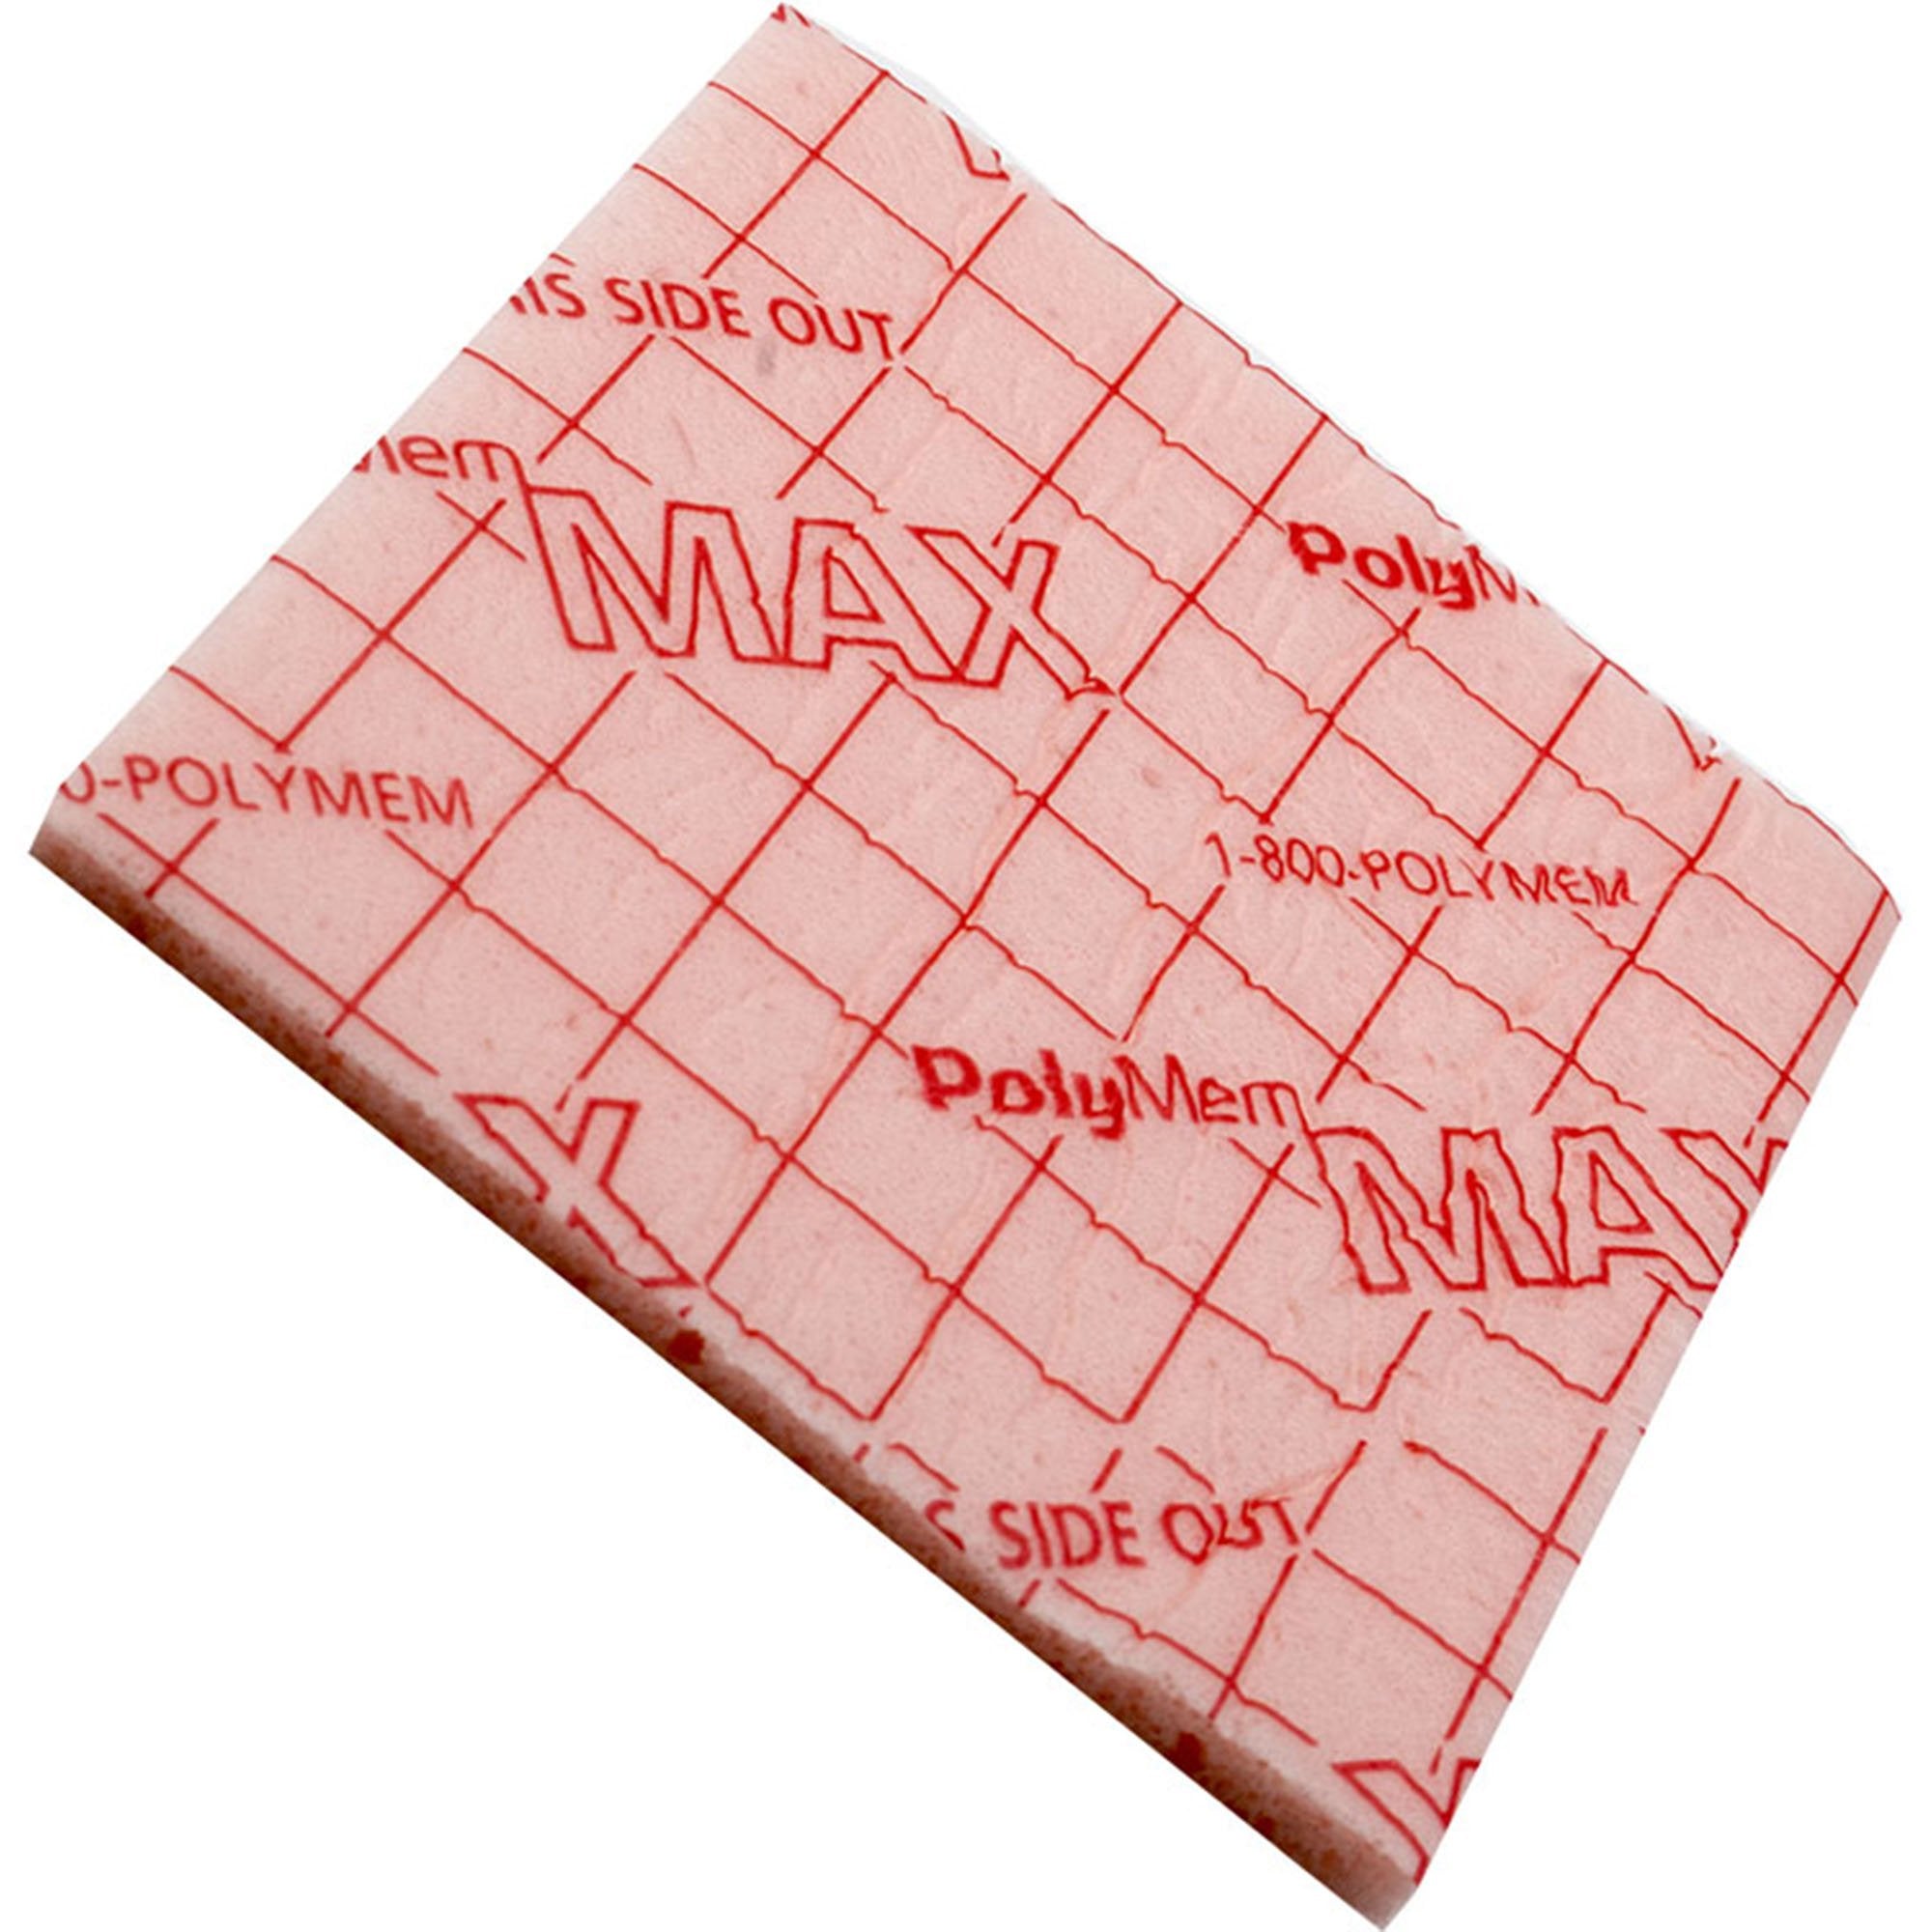 Foam Dressing PolyMem® Max® 3 X 3 Inch Without Border Film Backing Nonadhesive Square Sterile